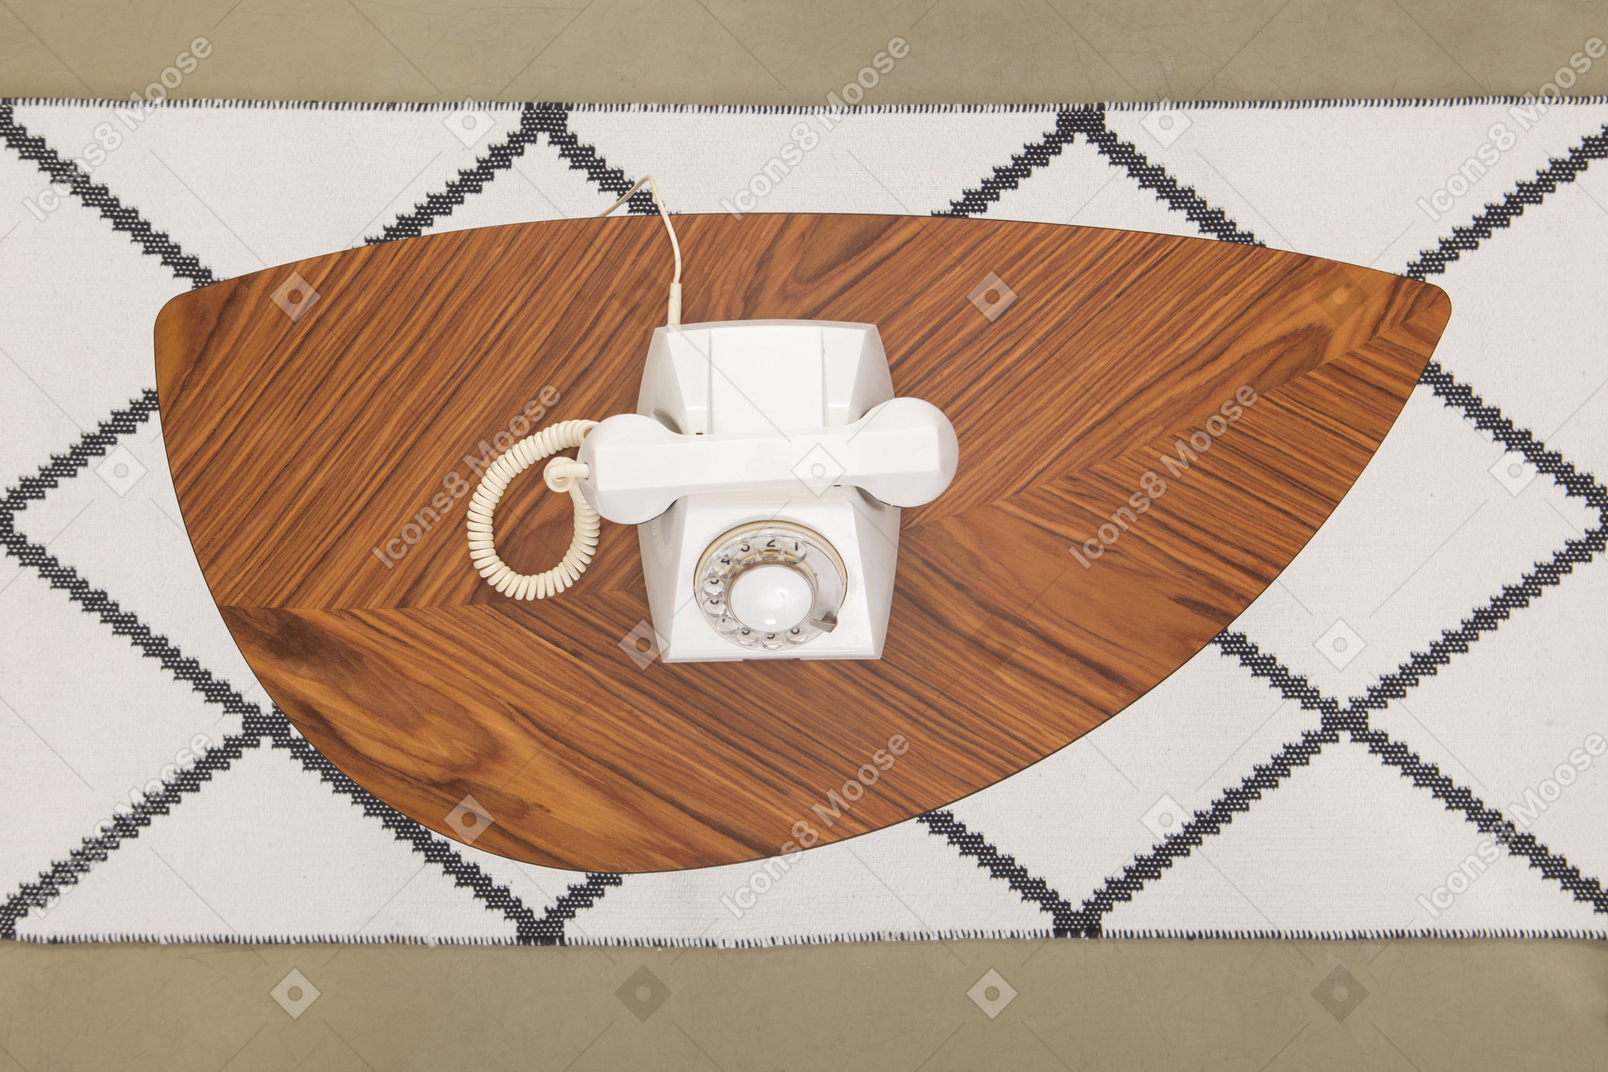 Vintage telephone on a wooden coffee table